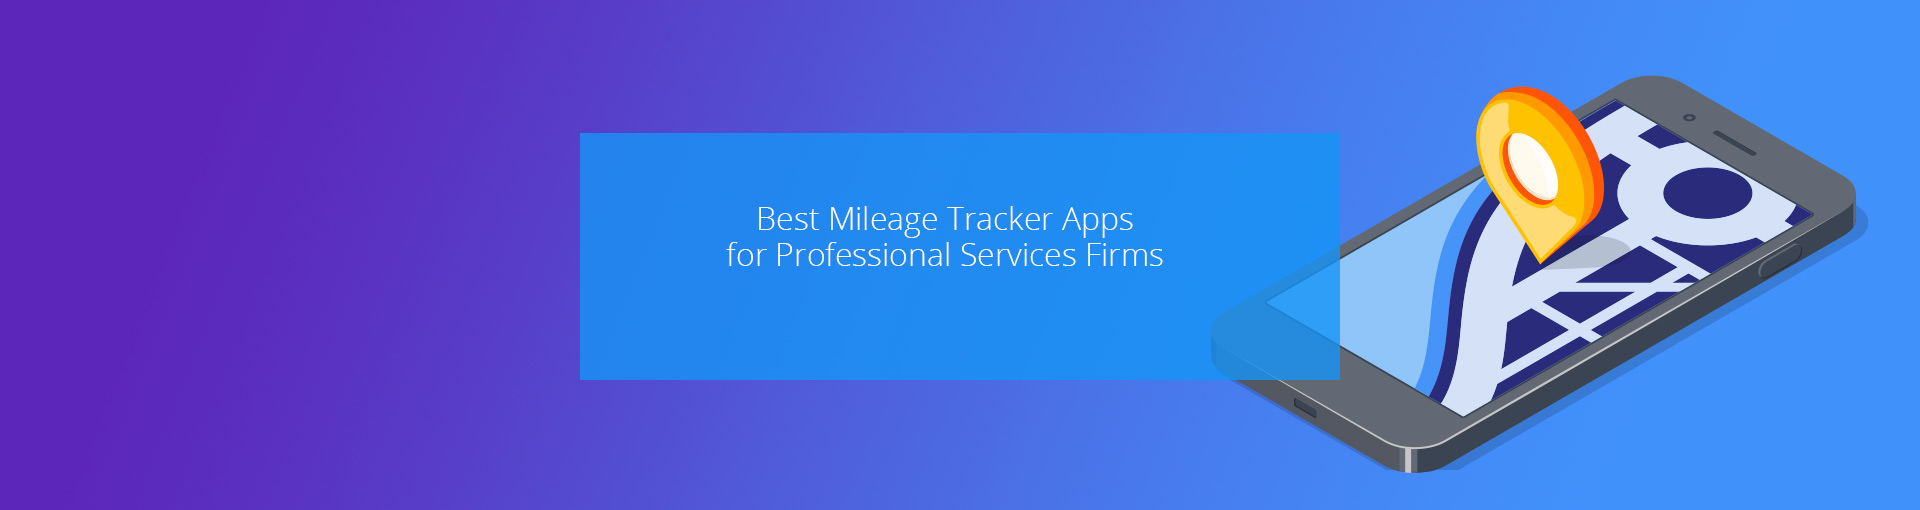 Best Mileage Tracker Apps for Professional Services Firms Featured Image